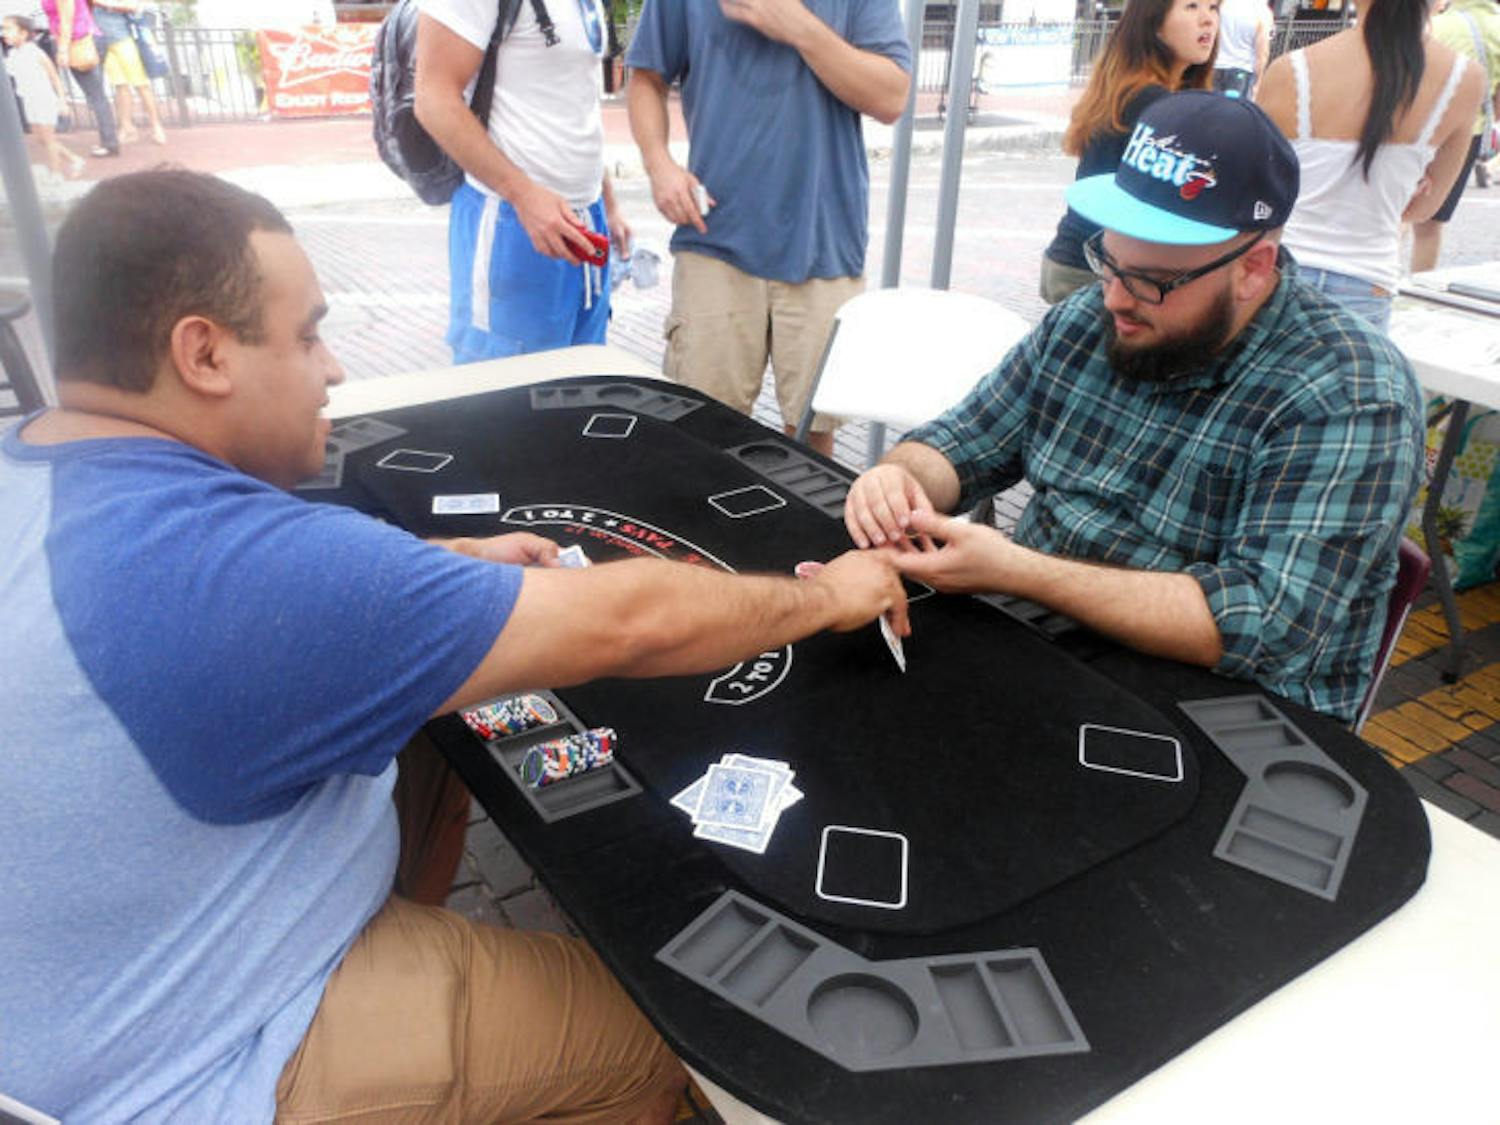 Tony Espetia, client relations director for The Pledge 5 Foundation, left, and Hector Galvez play for a cause at the blackjack table during the “Viva Gainesvegas” charity event Friday evening.
&nbsp;